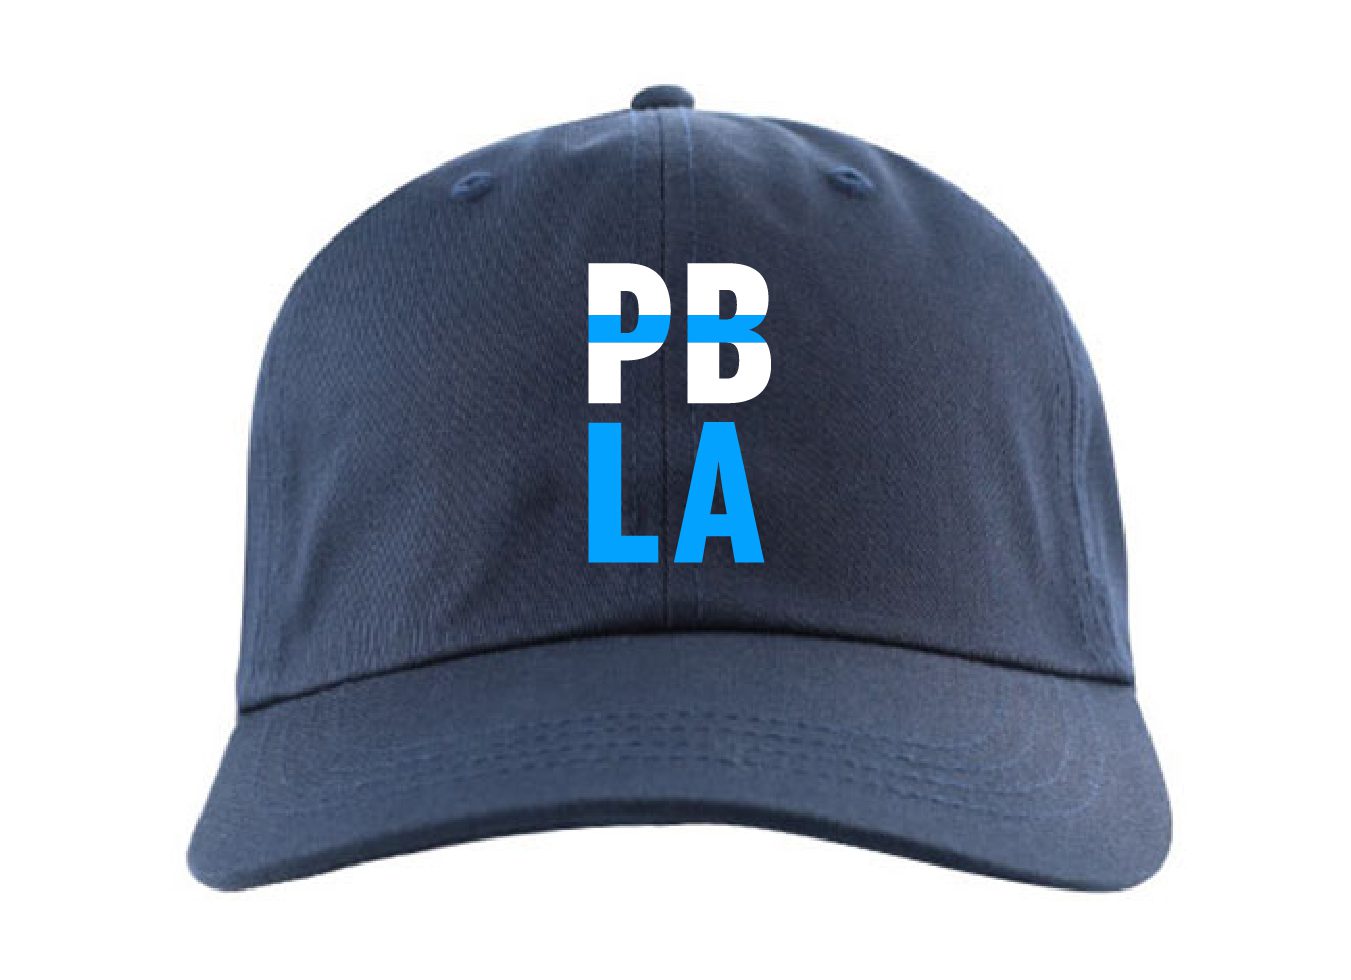 A navy blue hat with the letters pb la on it.